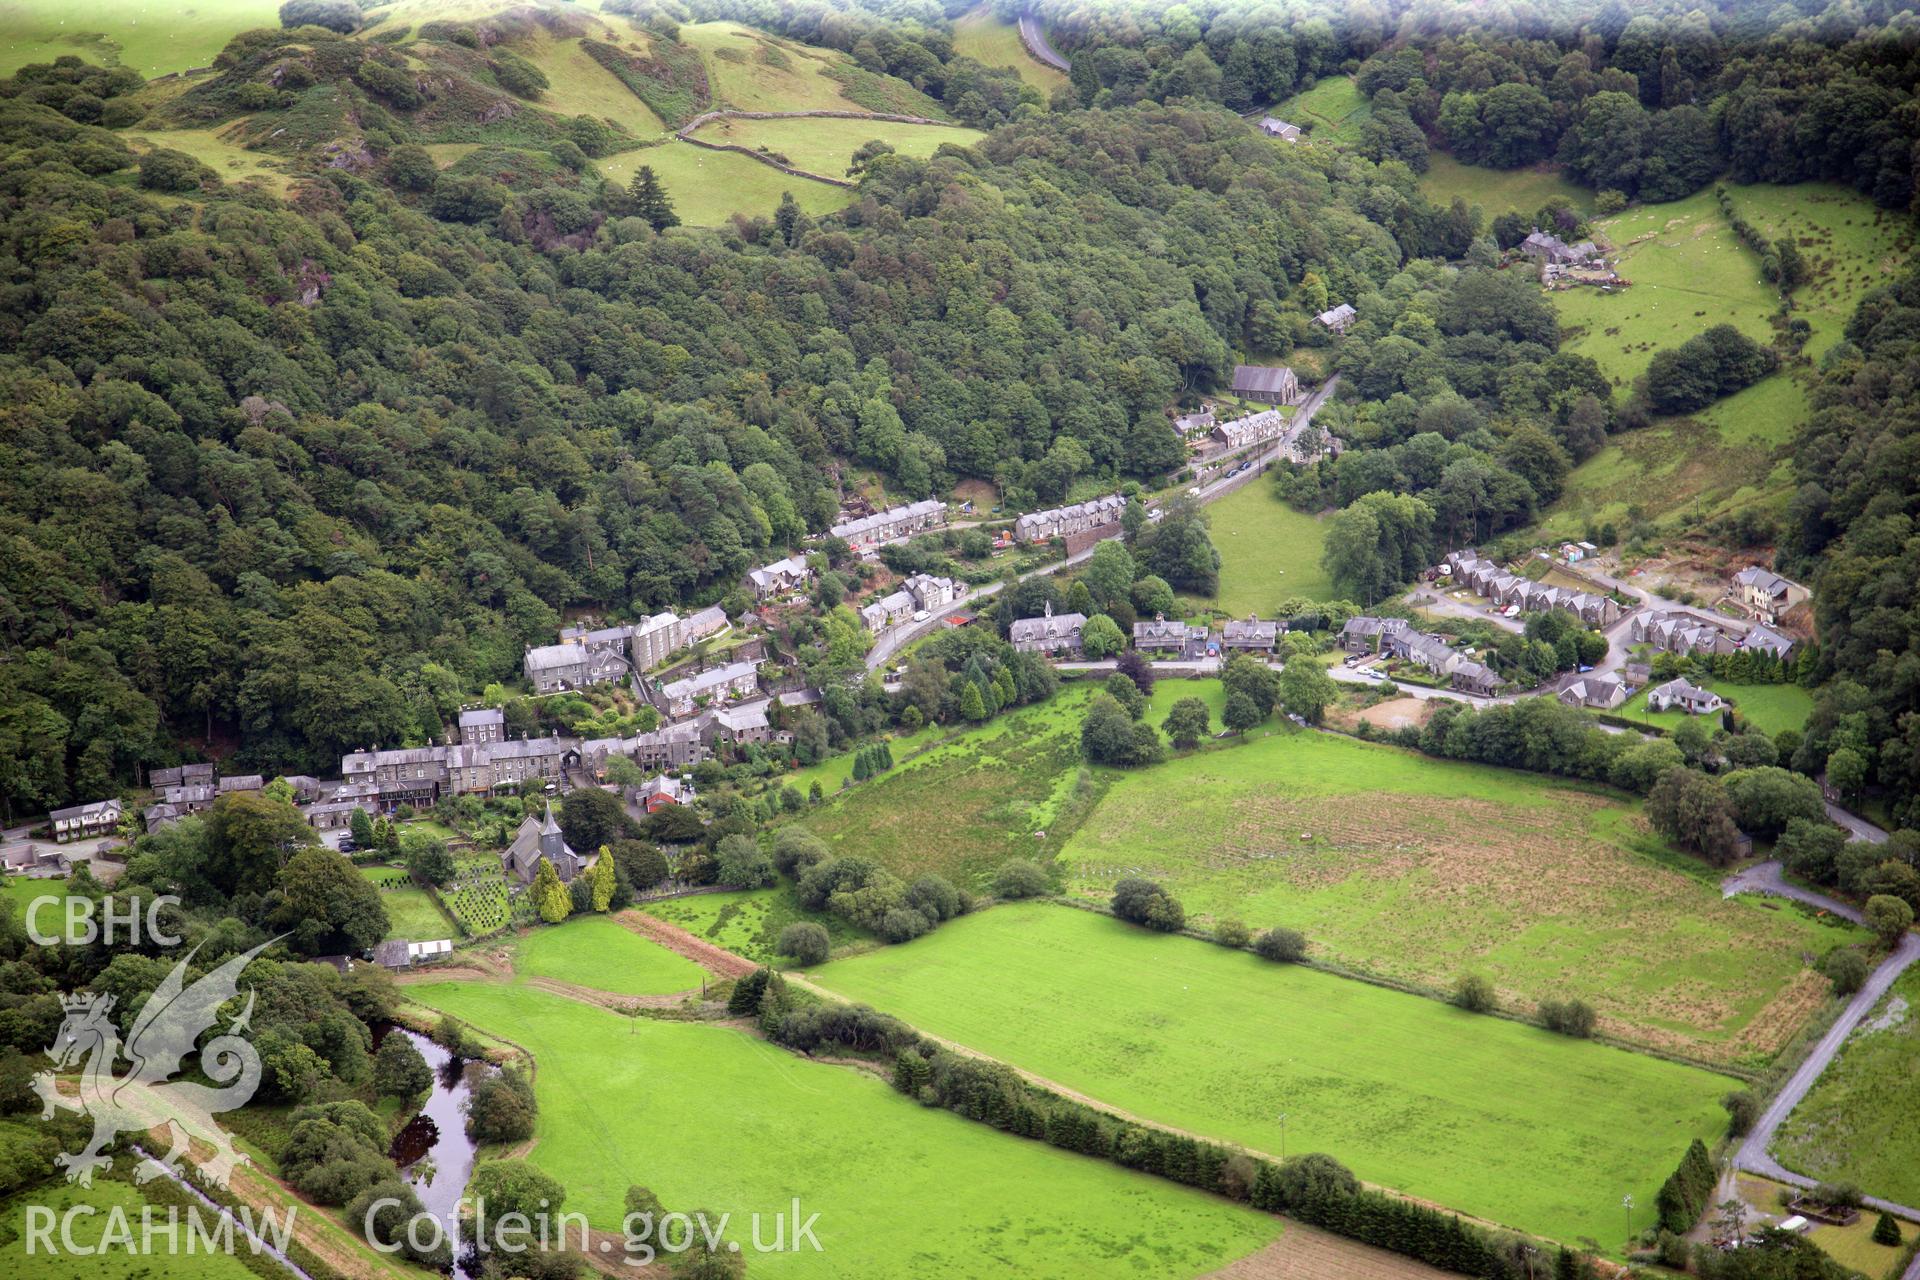 RCAHMW colour oblique photograph of Maentwrog, with St Twrog's Church. Taken by Toby Driver on 17/08/2011.